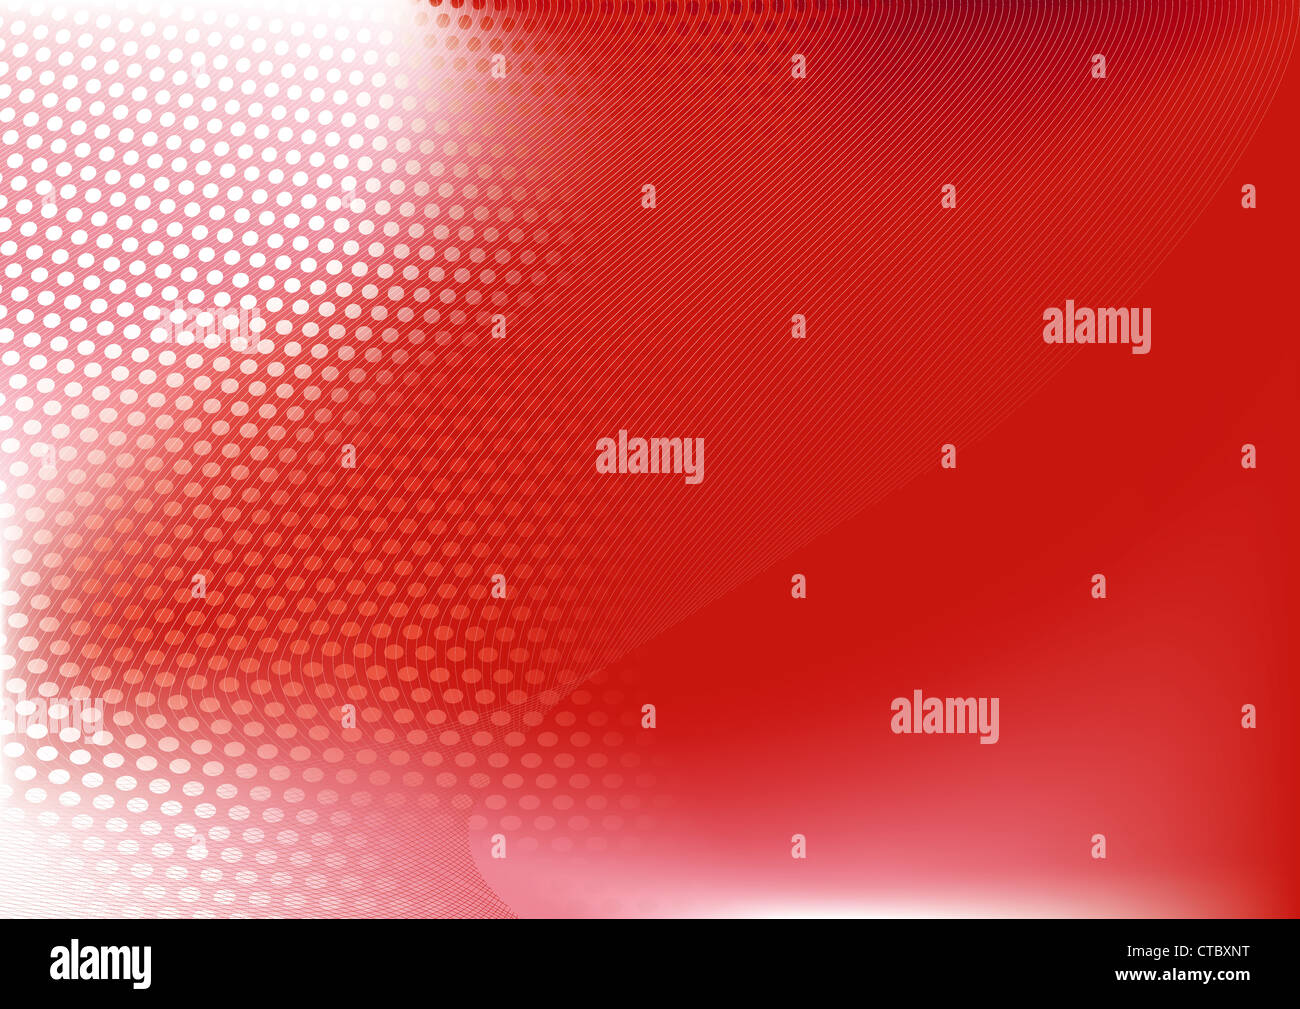 red abstract techno background composition dots curved lines--great for backgrounds layering over other images Stock Photo